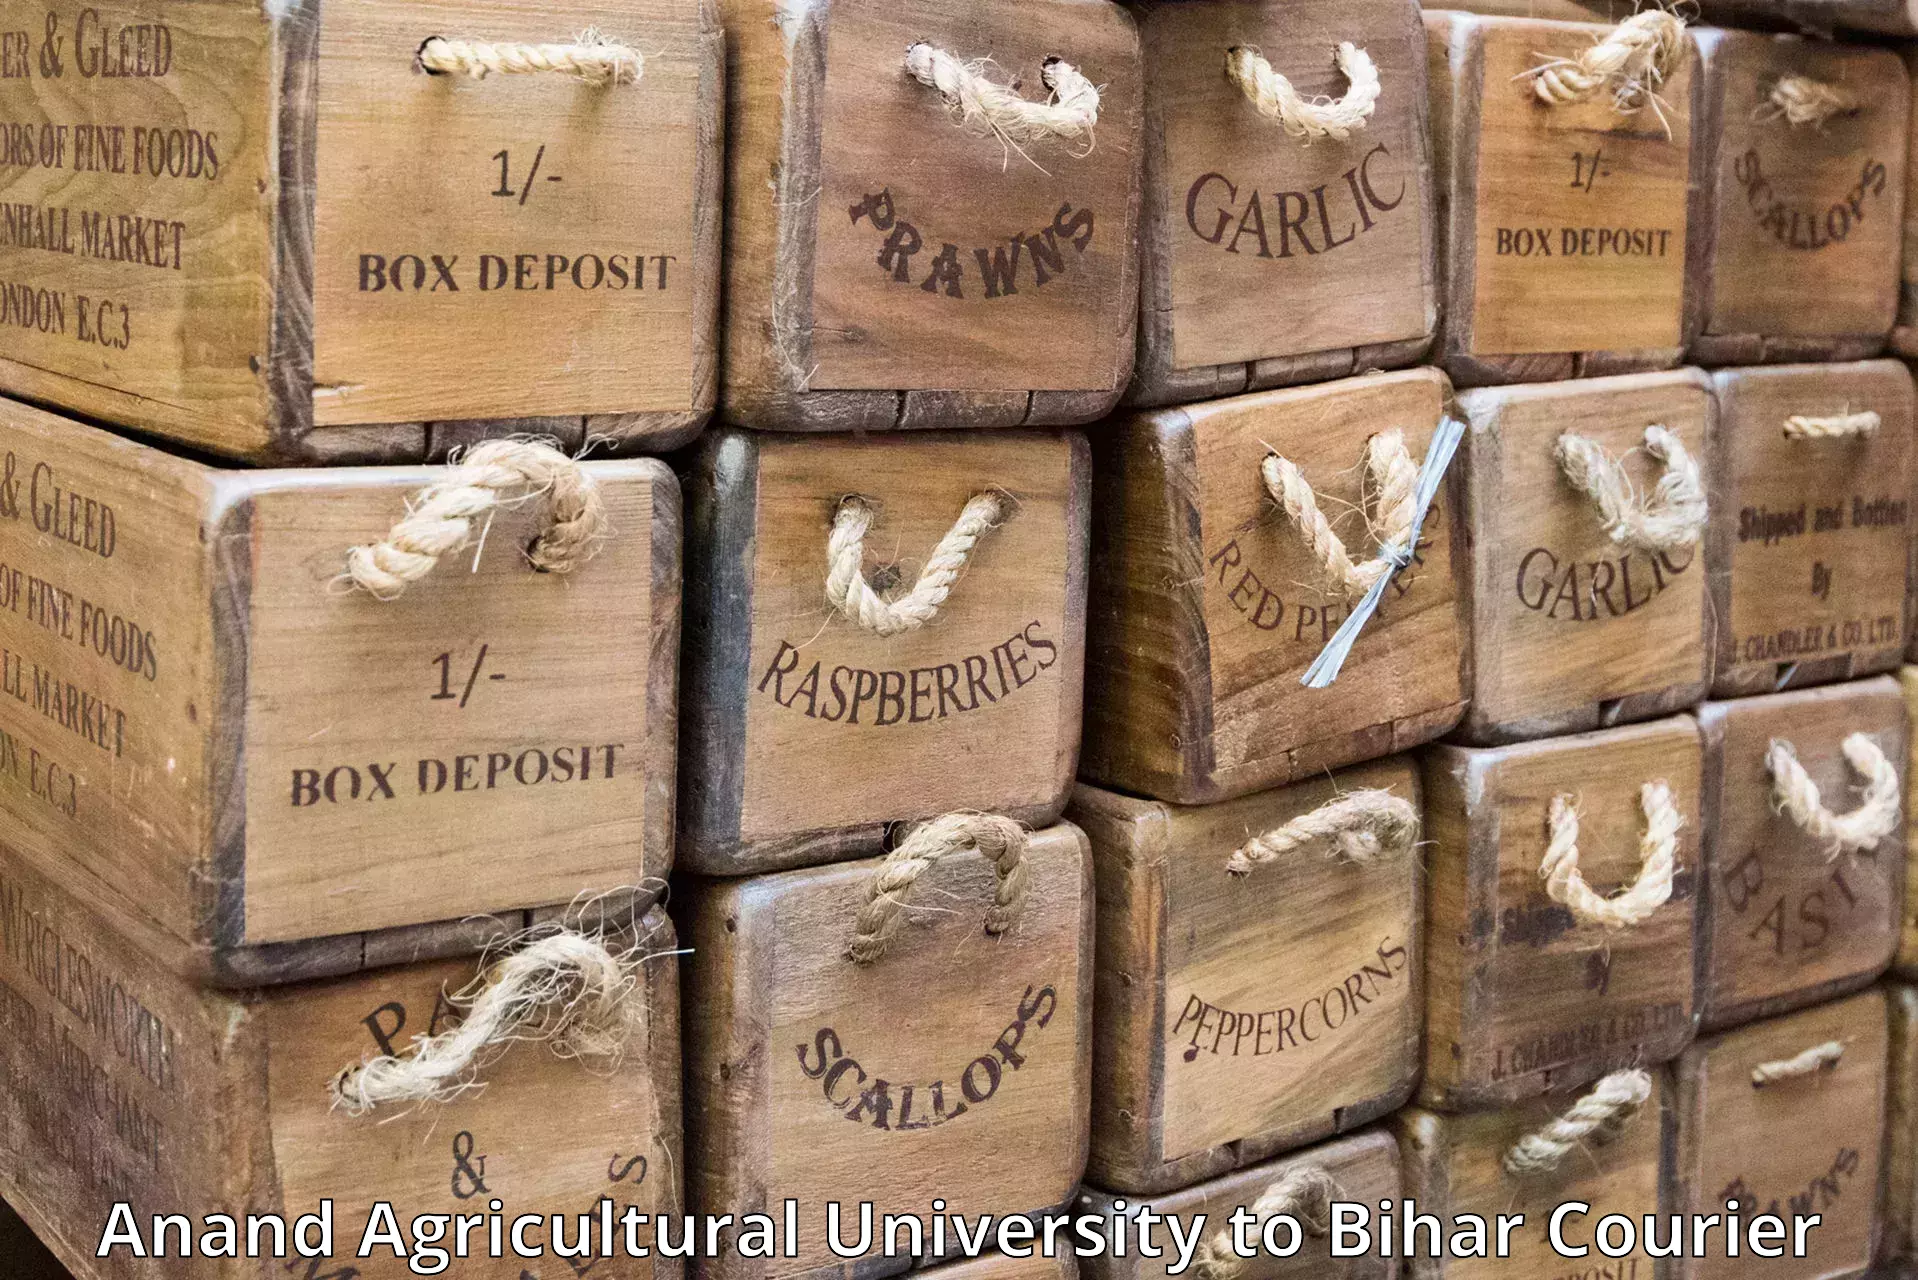 Domestic courier Anand Agricultural University to Bikramganj